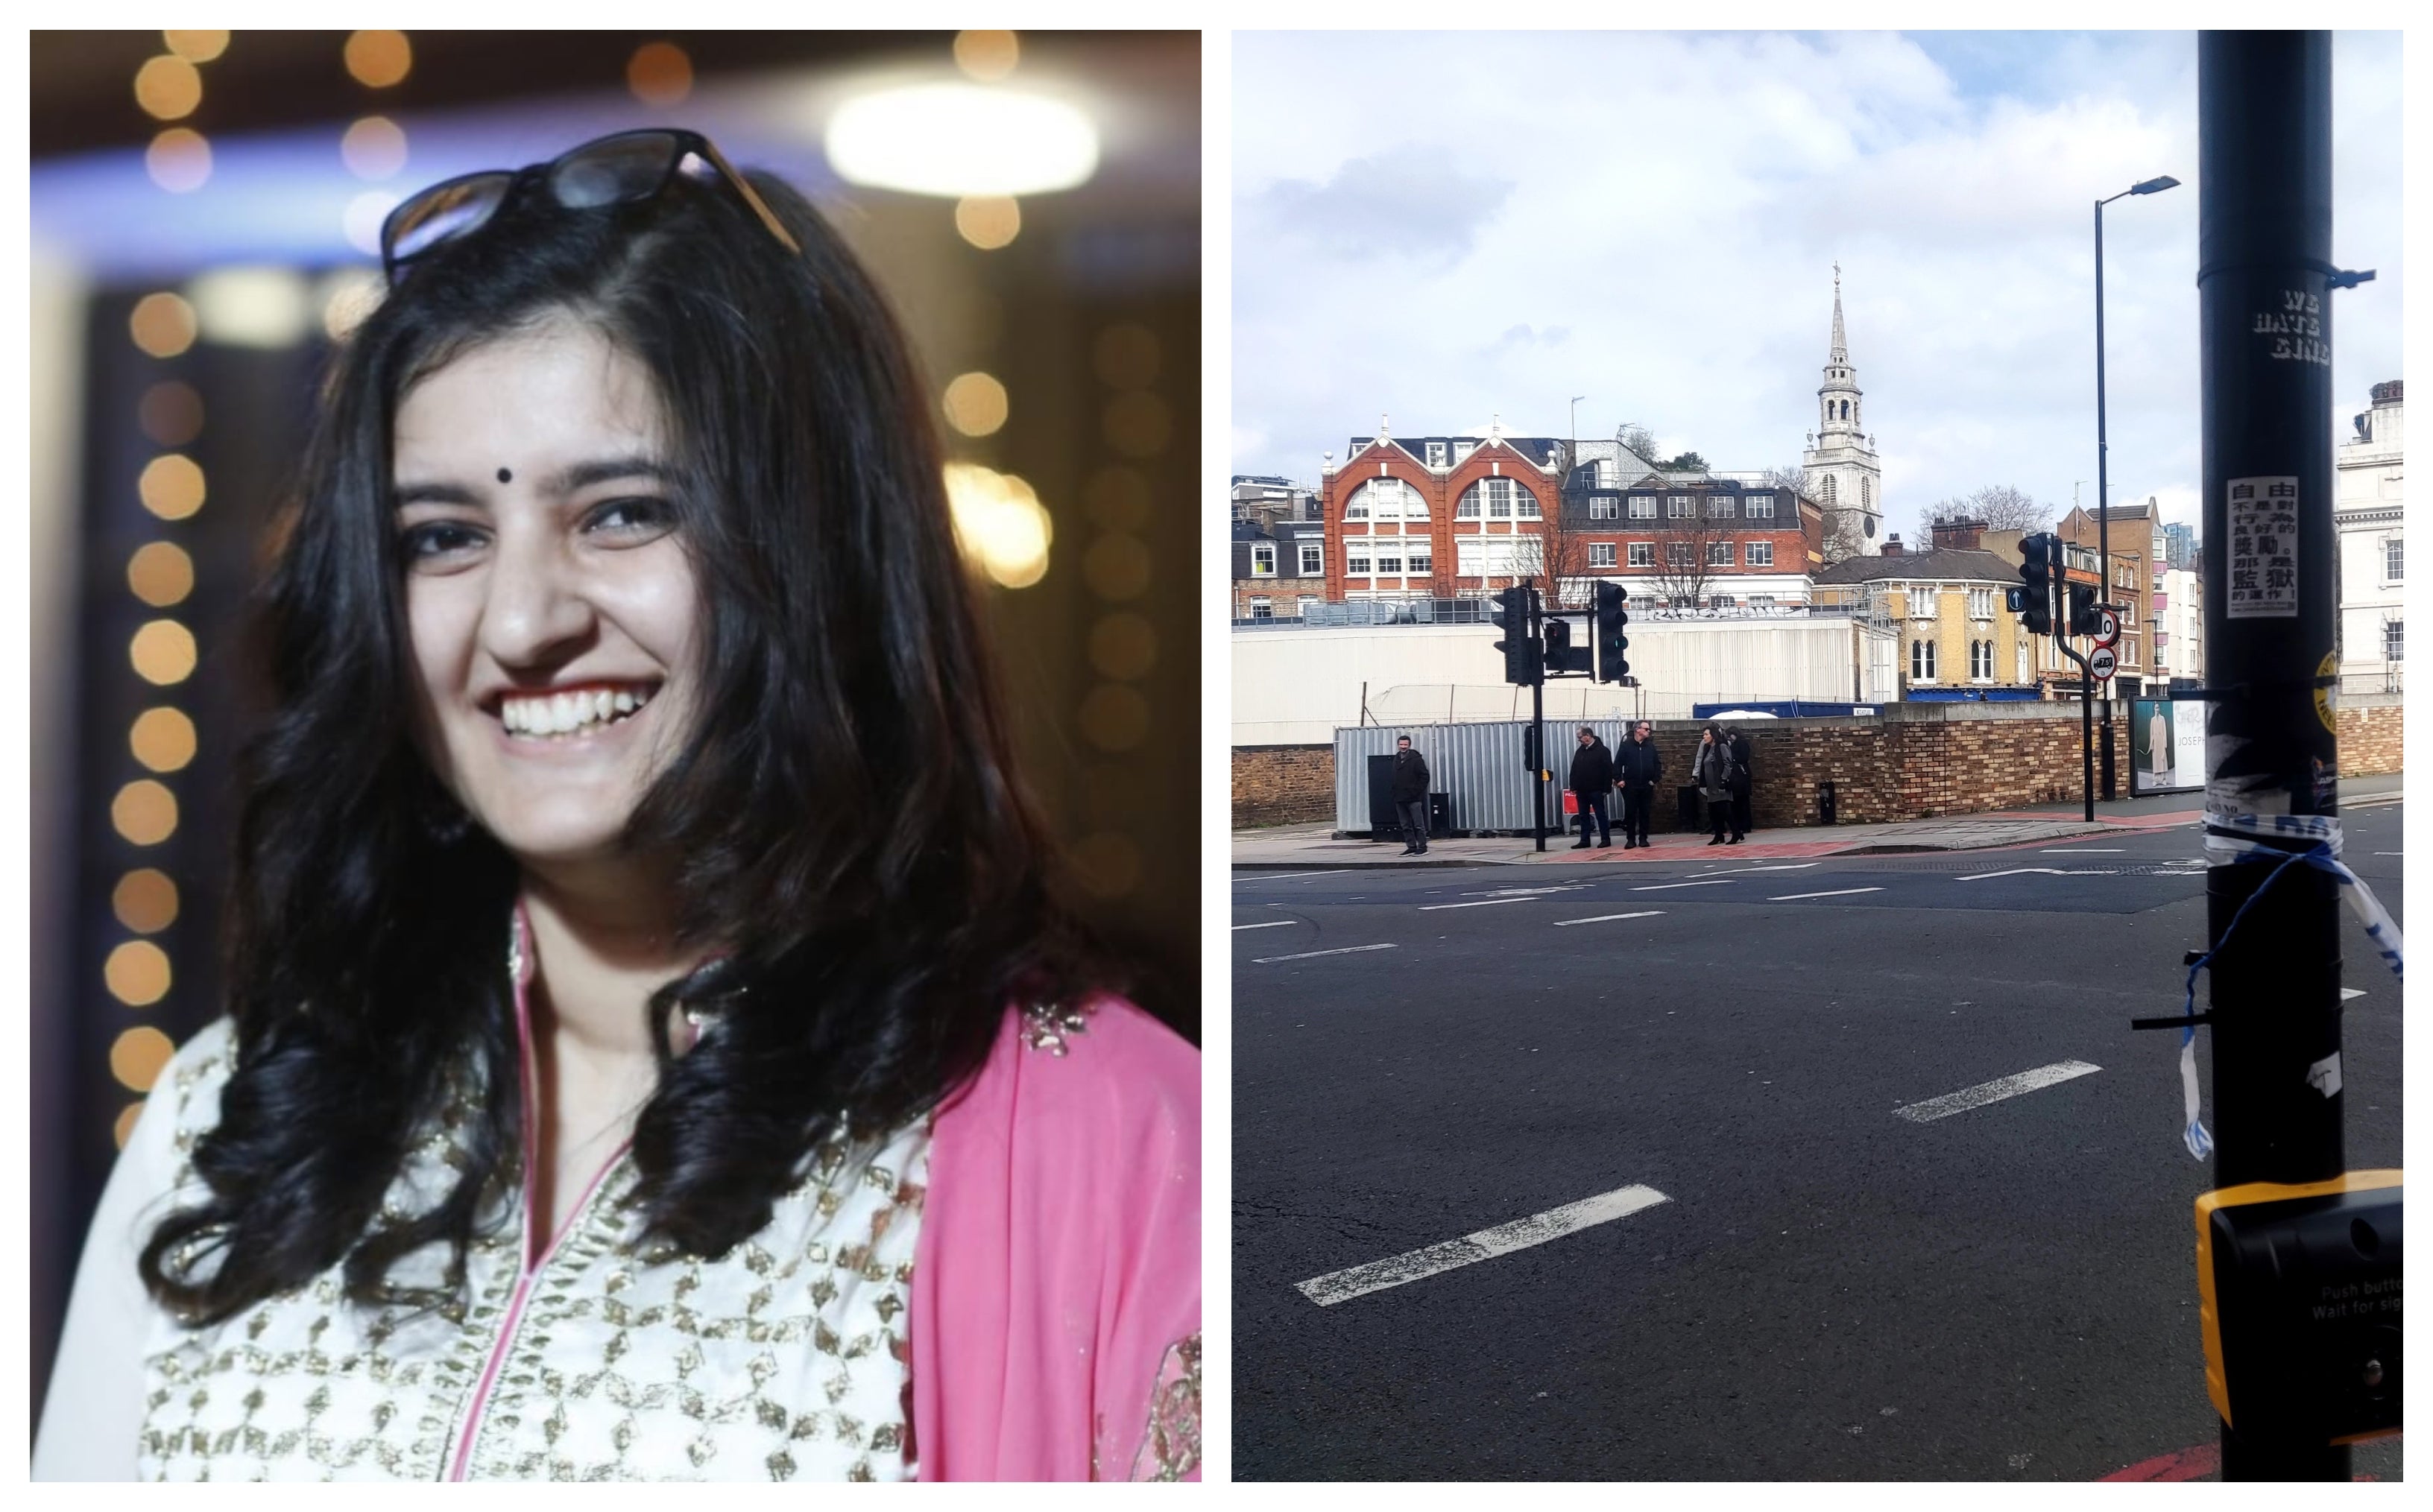 Cheistha Kochhar, 33, was named as the cyclist killed in the collision